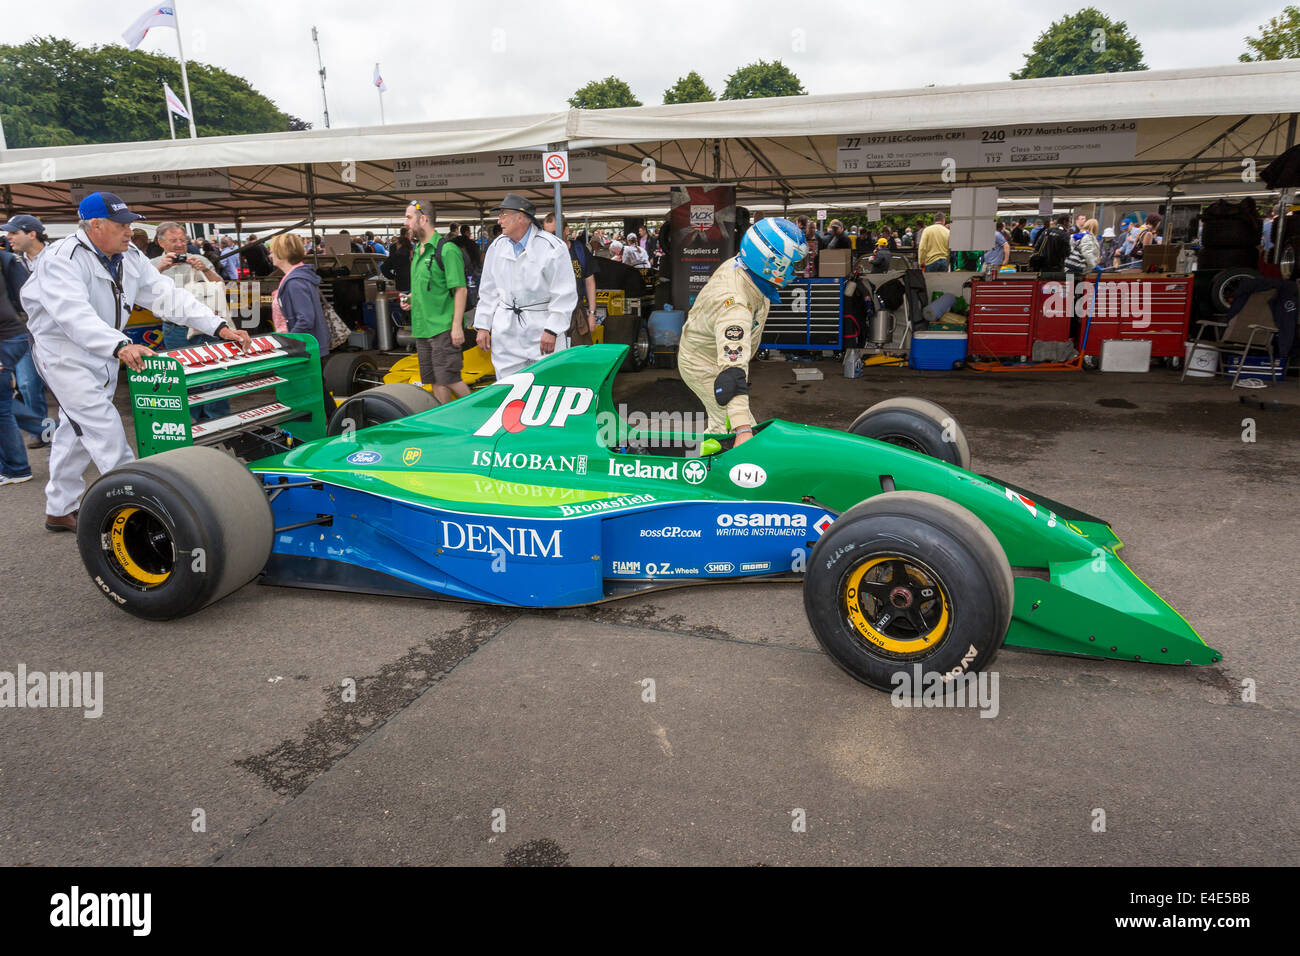 1991 Jordan-Ford 191 F1 car in the paddock at the 2014 Goodwood Festival of  Speed, Sussex, UK Stock Photo - Alamy